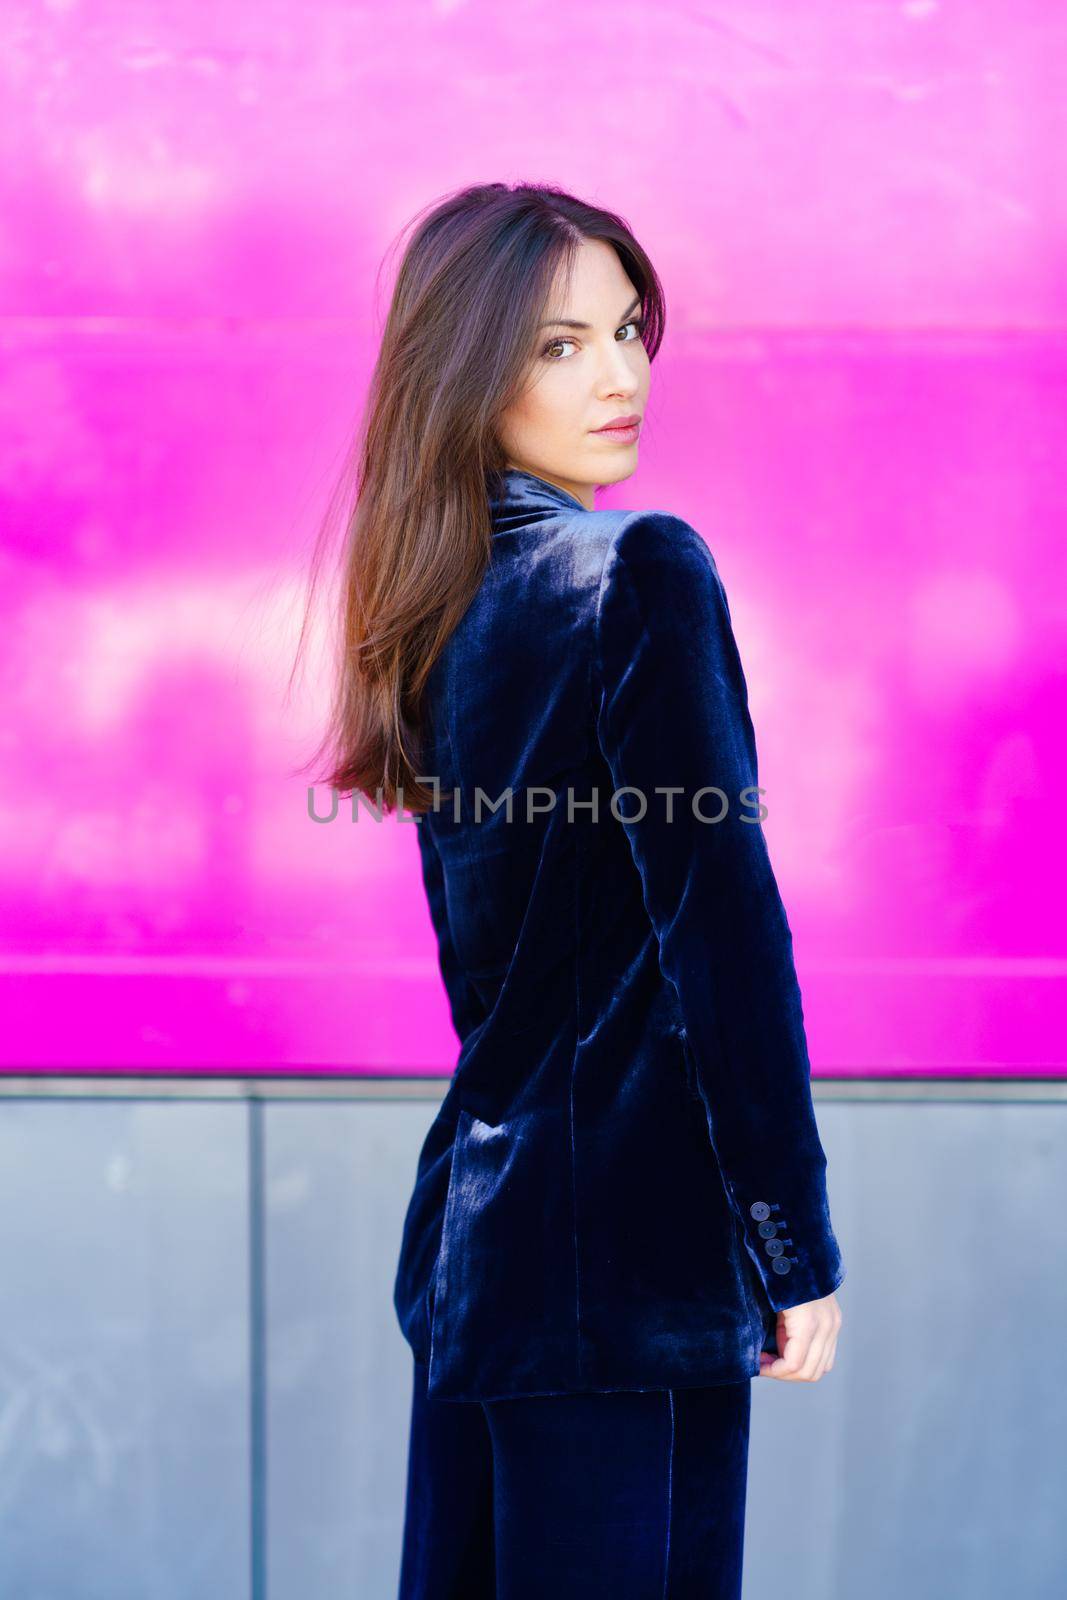 Woman wearing blue suit posing near a modern building. Lifestyle concept.